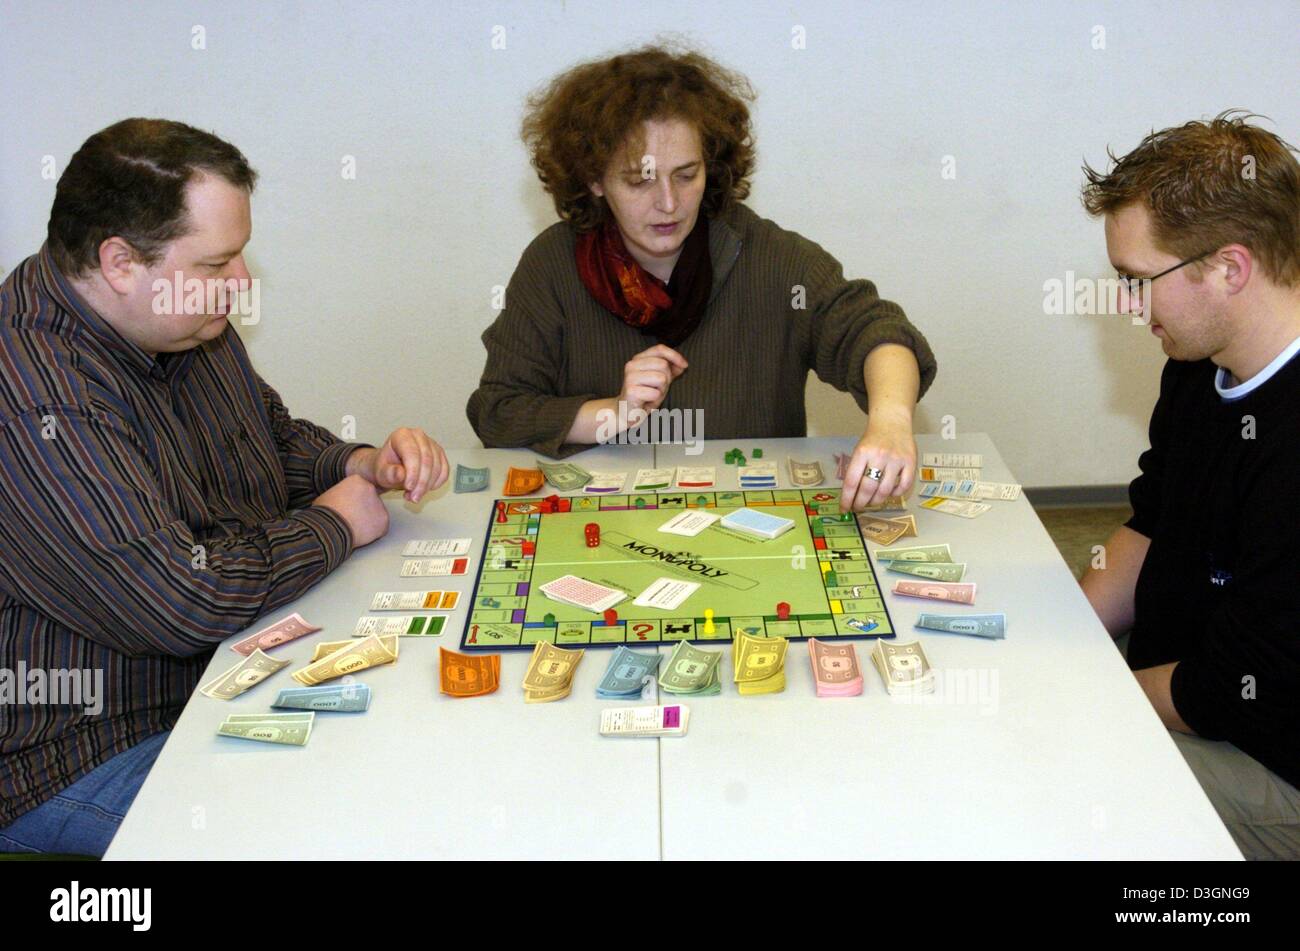 people playing a game